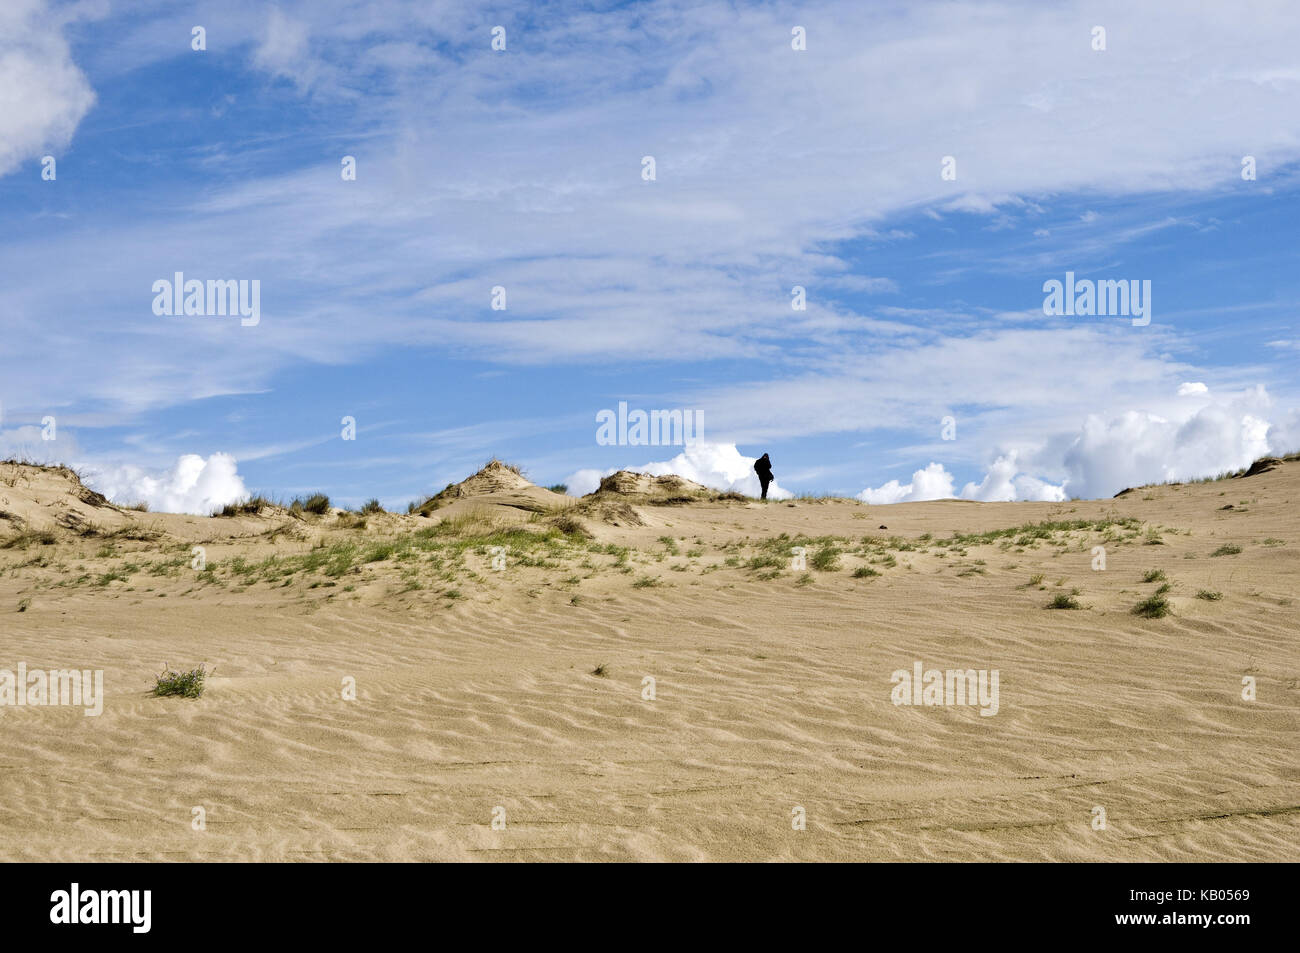 Lithuania, Nida, Sand dunes with grass, sky, clouds, Stock Photo